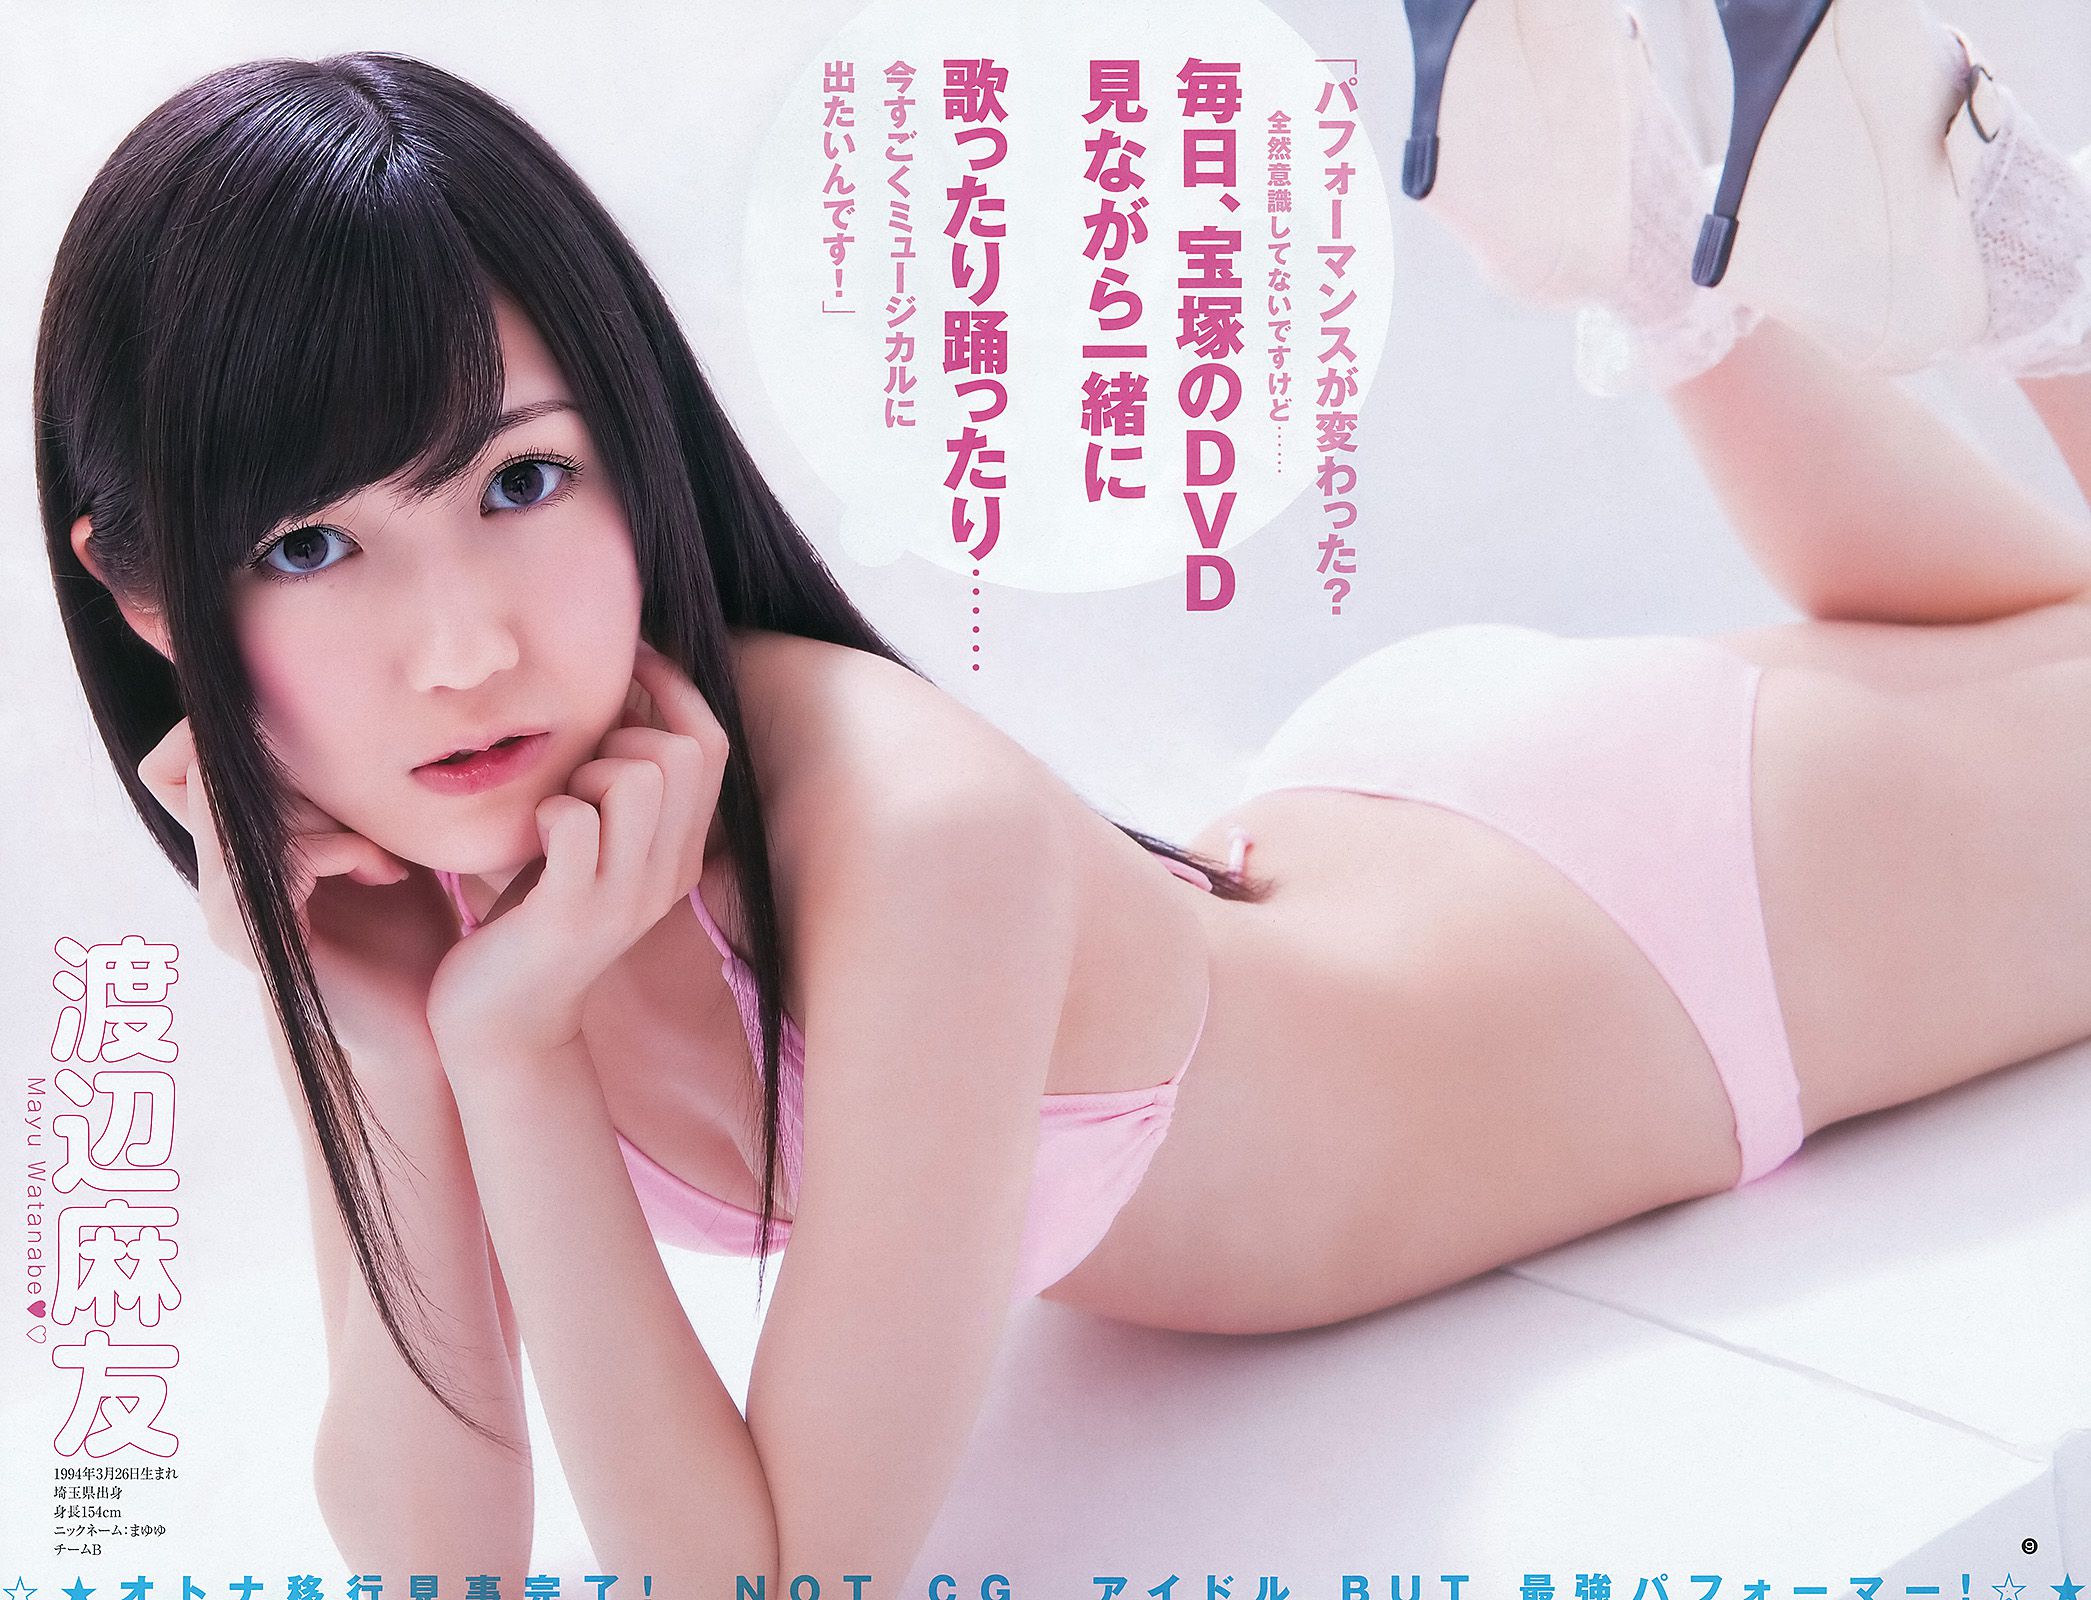 AKB48 《DOUBLE ABILITY》 [Weekly Young Jump] 2012 No.26 Photo Magazine Page 10 No.73f18f